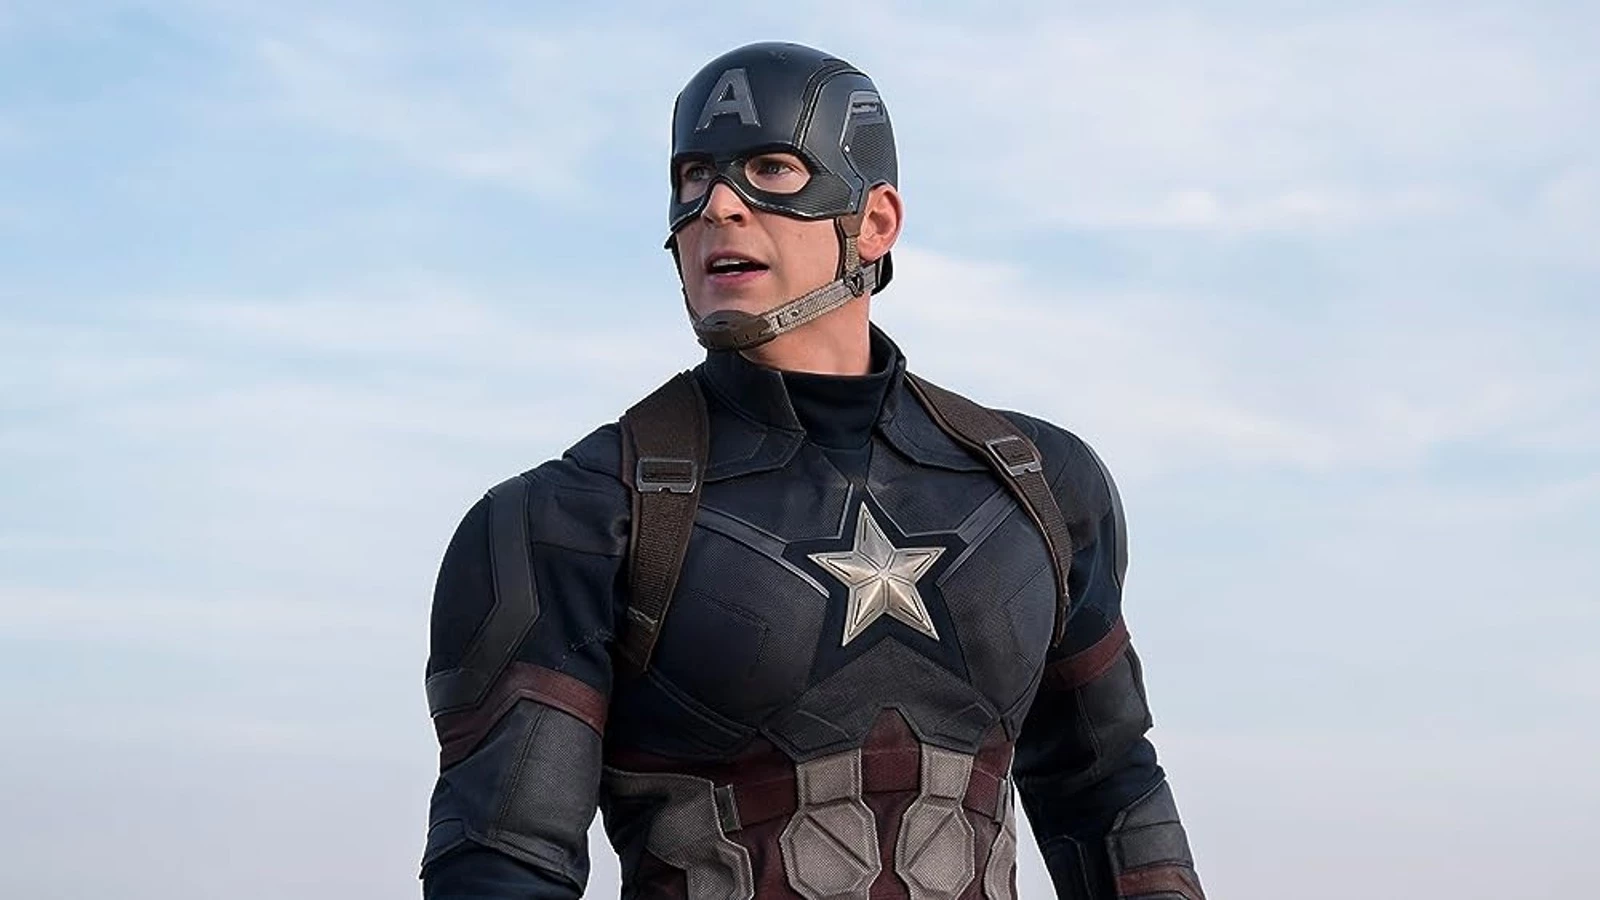 How Can Chris Evans Return To The MCU?